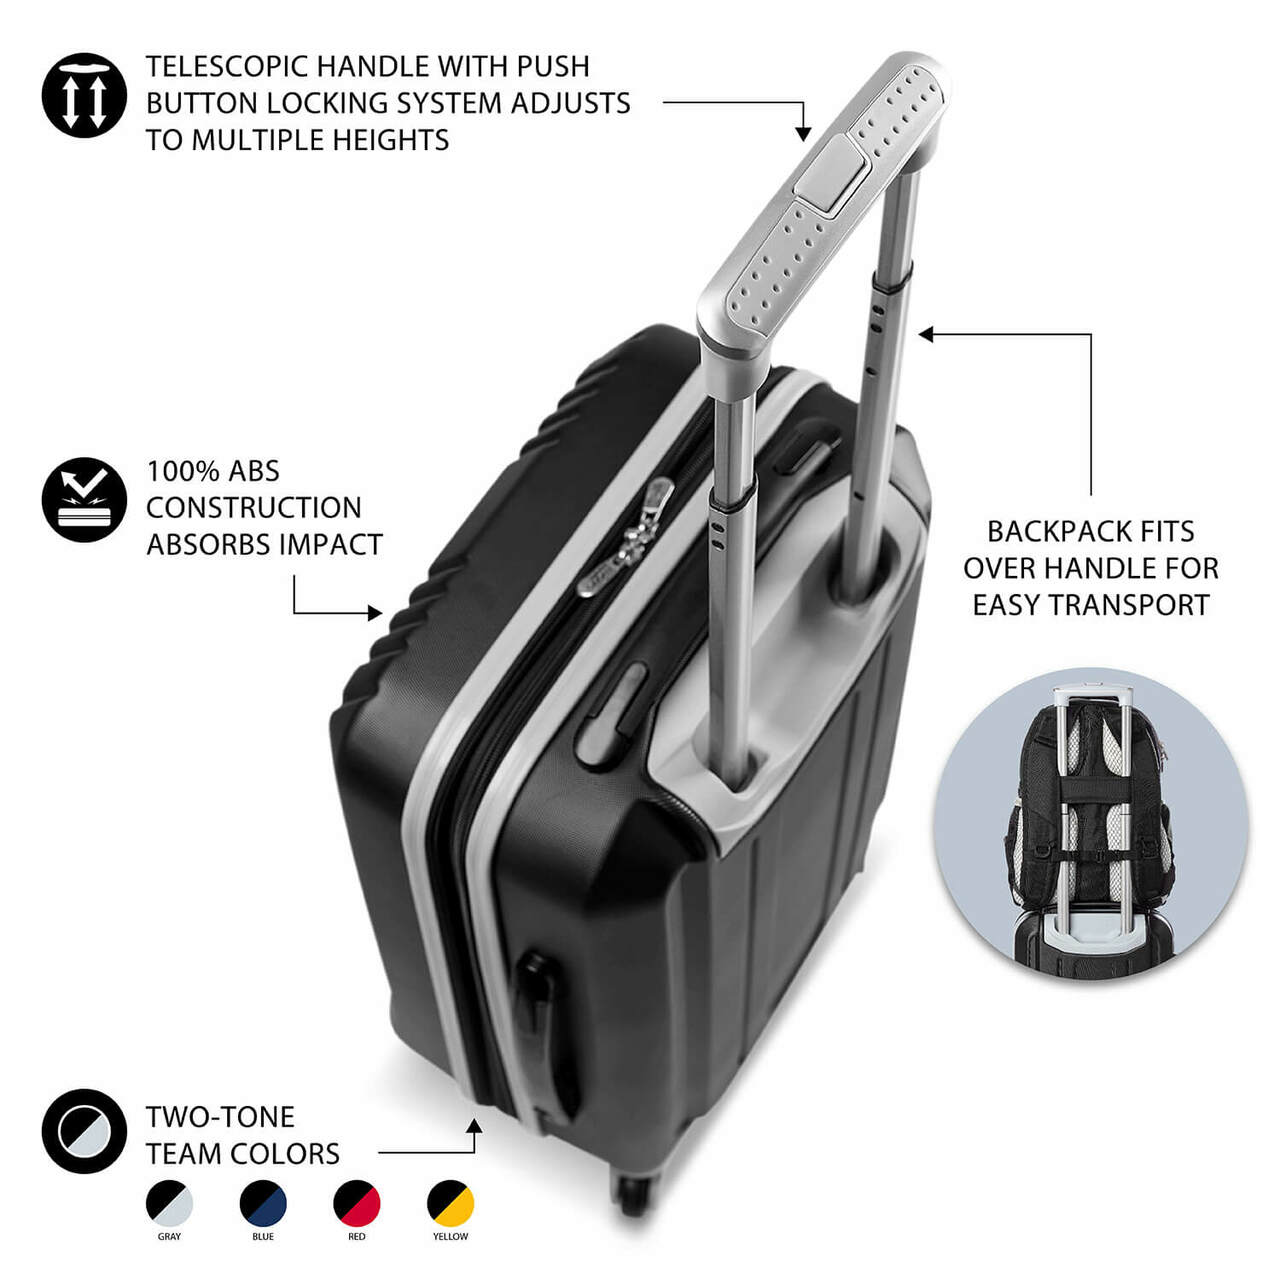 Tennessee Carry On Spinner Luggage | Tennessee Hardcase Two-Tone Luggage Carry-on Spinner in Black